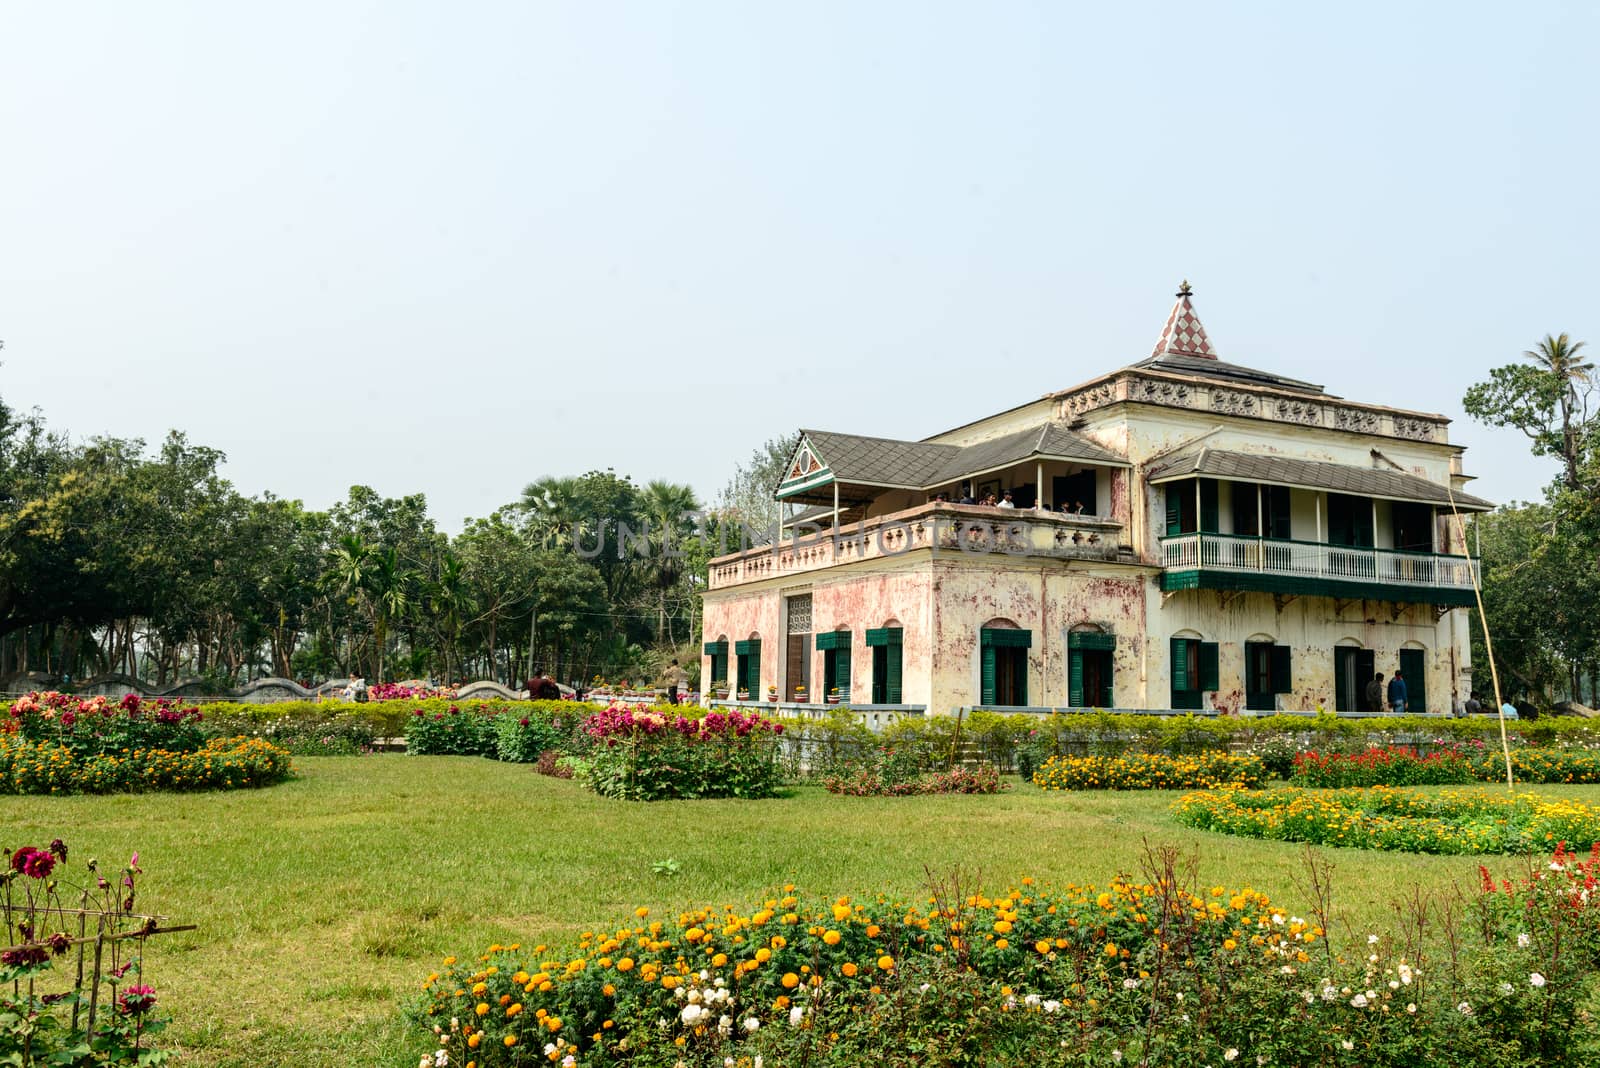 KUSHTIA, BANGLADESH - FEBRUARY 22: The Photo was taken on FEBRUARY 22, 2014. Shilaidaha Kuthi Bari is a place in Kumarkhali Upazila of Kushtia District in Bangladesh. The place is famous for Kuthi Bari; a country house made by Dwarkanath Tagore.Rabindranath Tagore lived a part of life here and created some of his memorable poems while living here. In 1890 Tagore started managing their family estates in Shelaidaha. He stayed there for over a dacade at irregular intervals between 1891 to 1901. It is a country house build by the father of Rabindranath, Maharshi Debendranath Tagore. The house was repossessed by a Bank; the Tagore Estate was a debtor to this Bank, who auctioned off the property and it became the possession of the Zamindar of Bhagyakul (Munshiganj), Roy family.